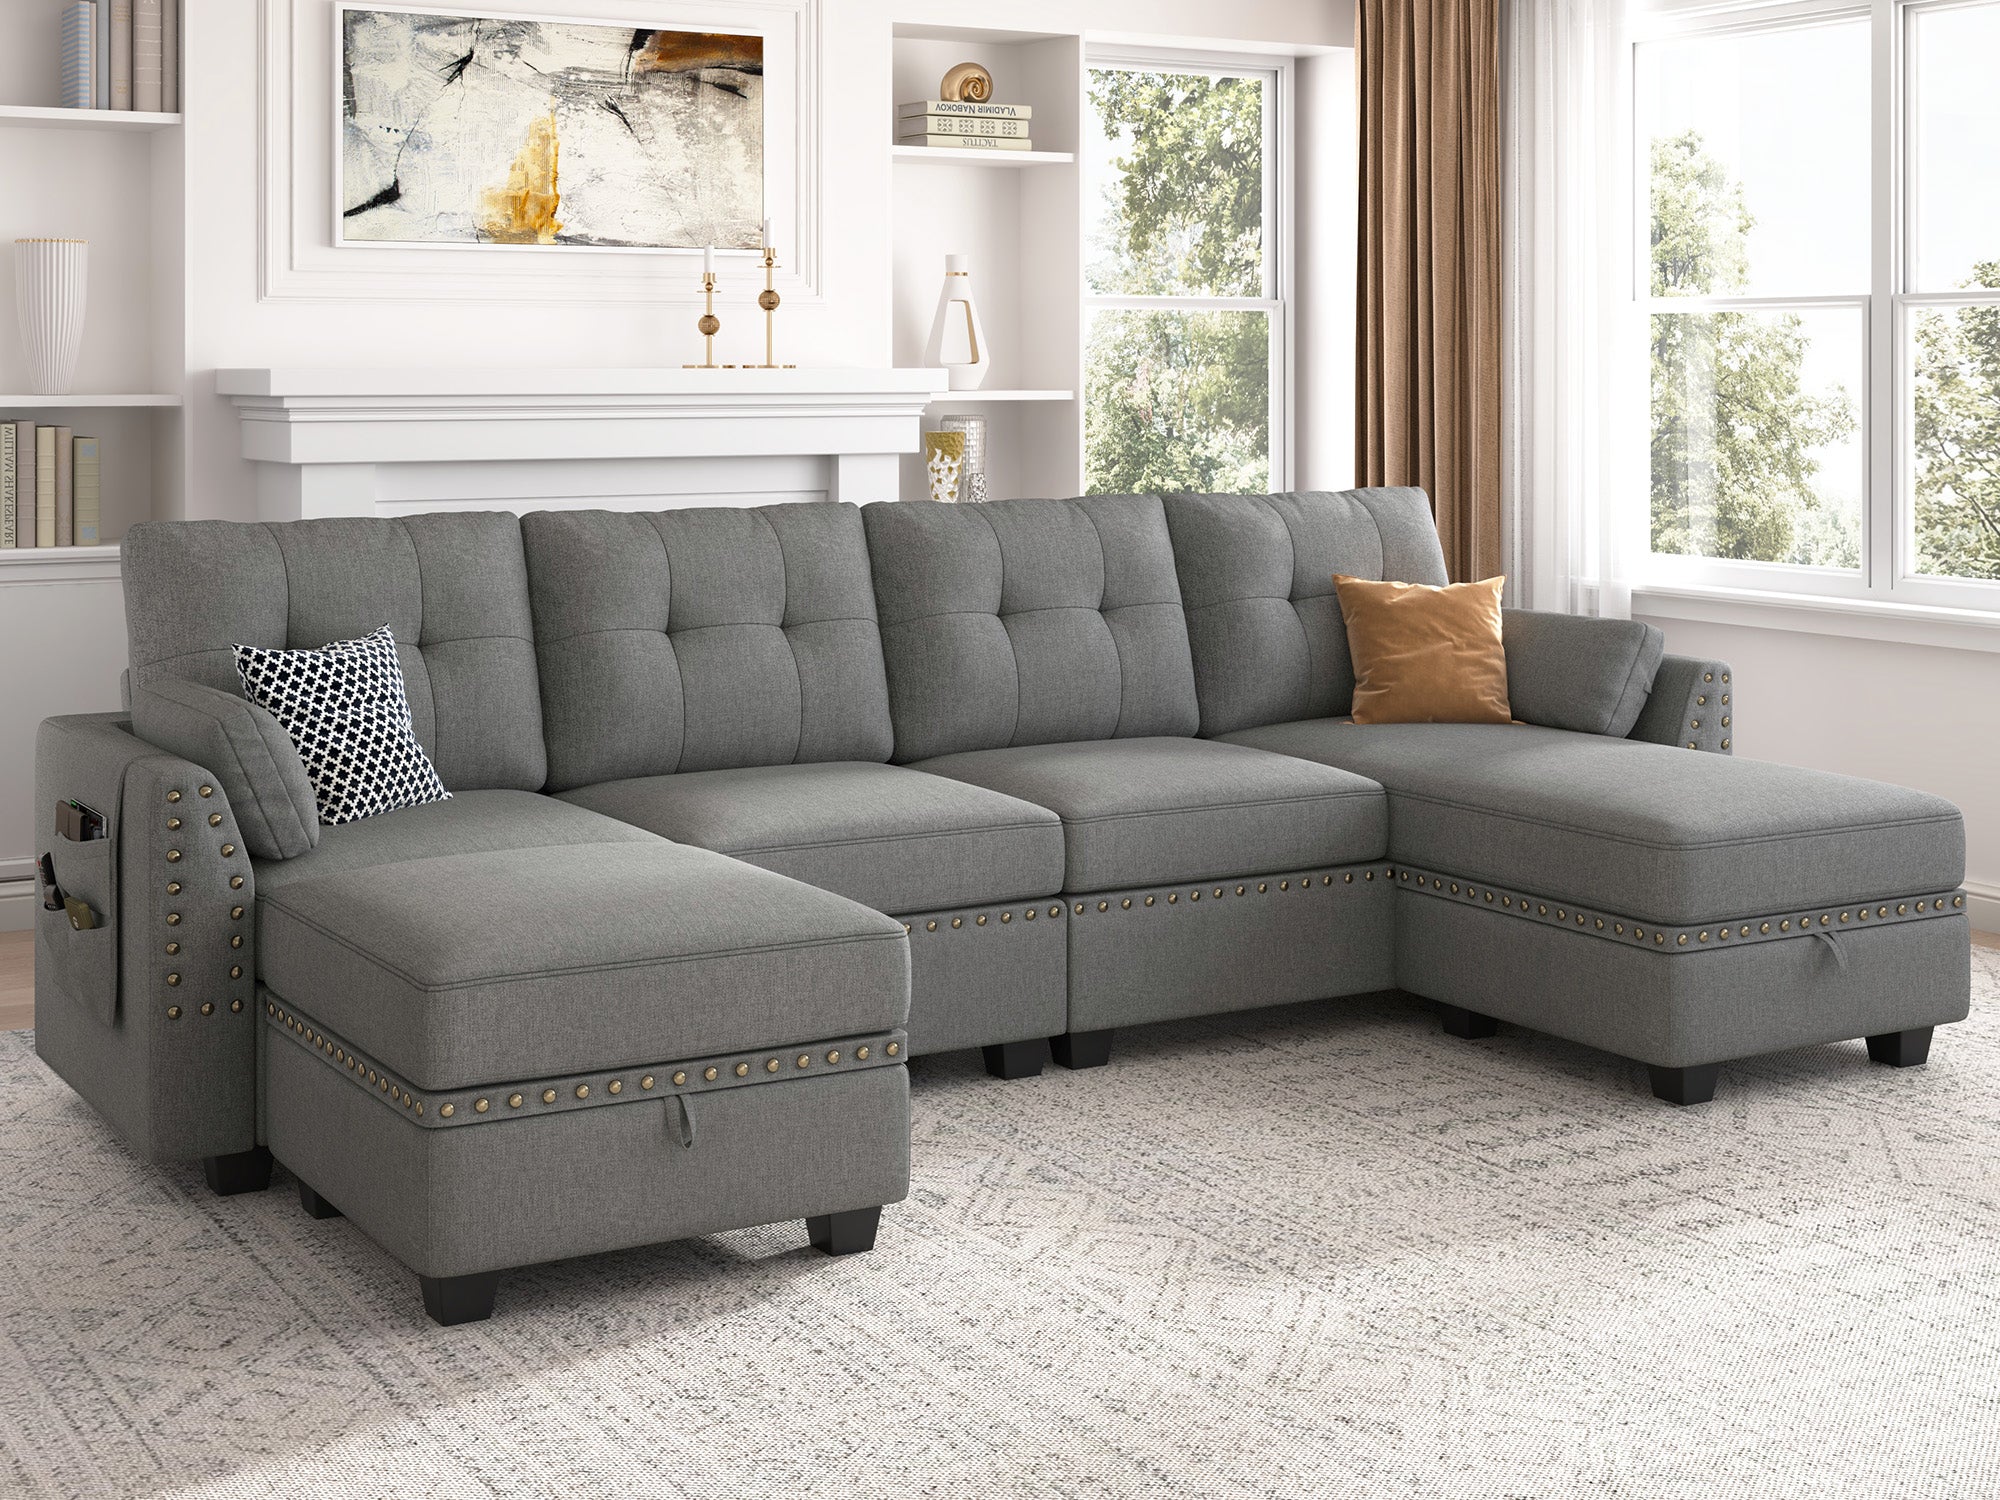 HONBAY 4-Seat U-Shaped Sectional Sofa with Storage Reversible Chaise Set